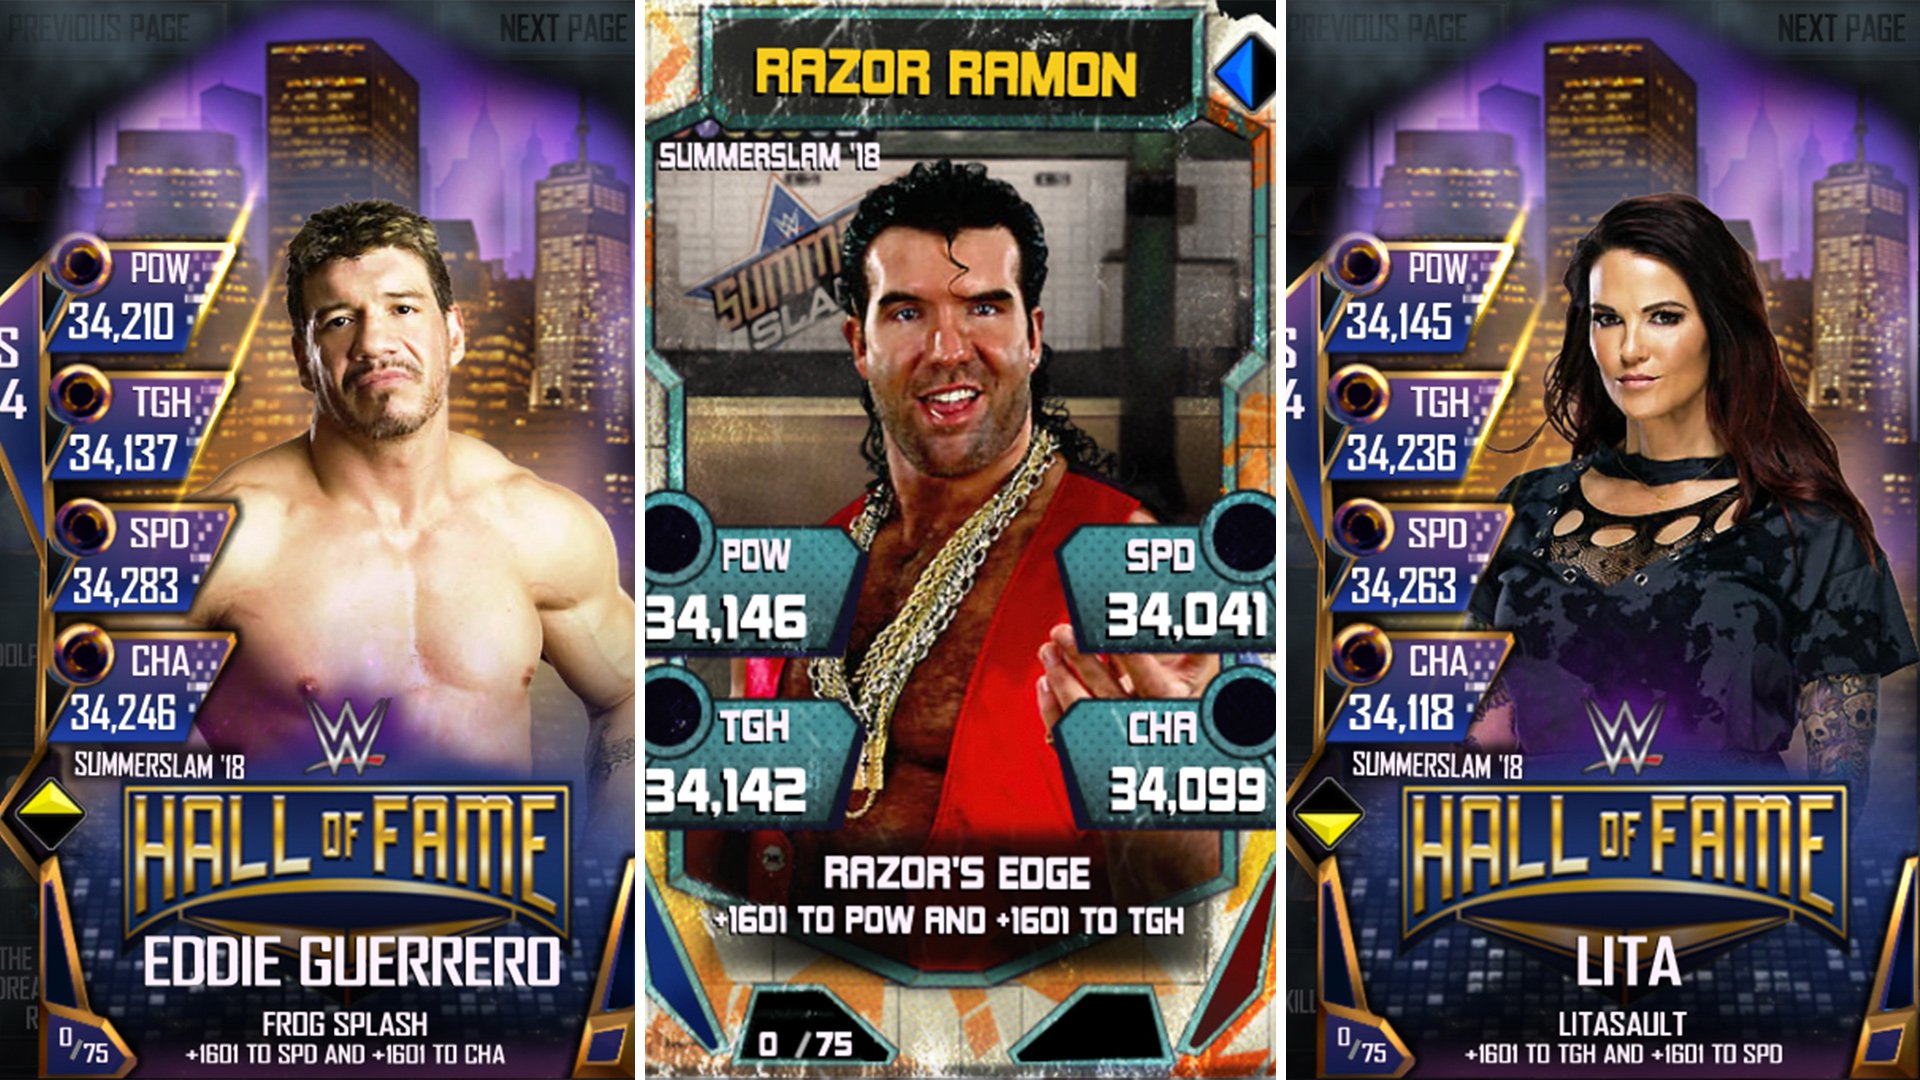 WWE SuperCard adds new SummerSlam ’18 Tier cards in latest update | WWE